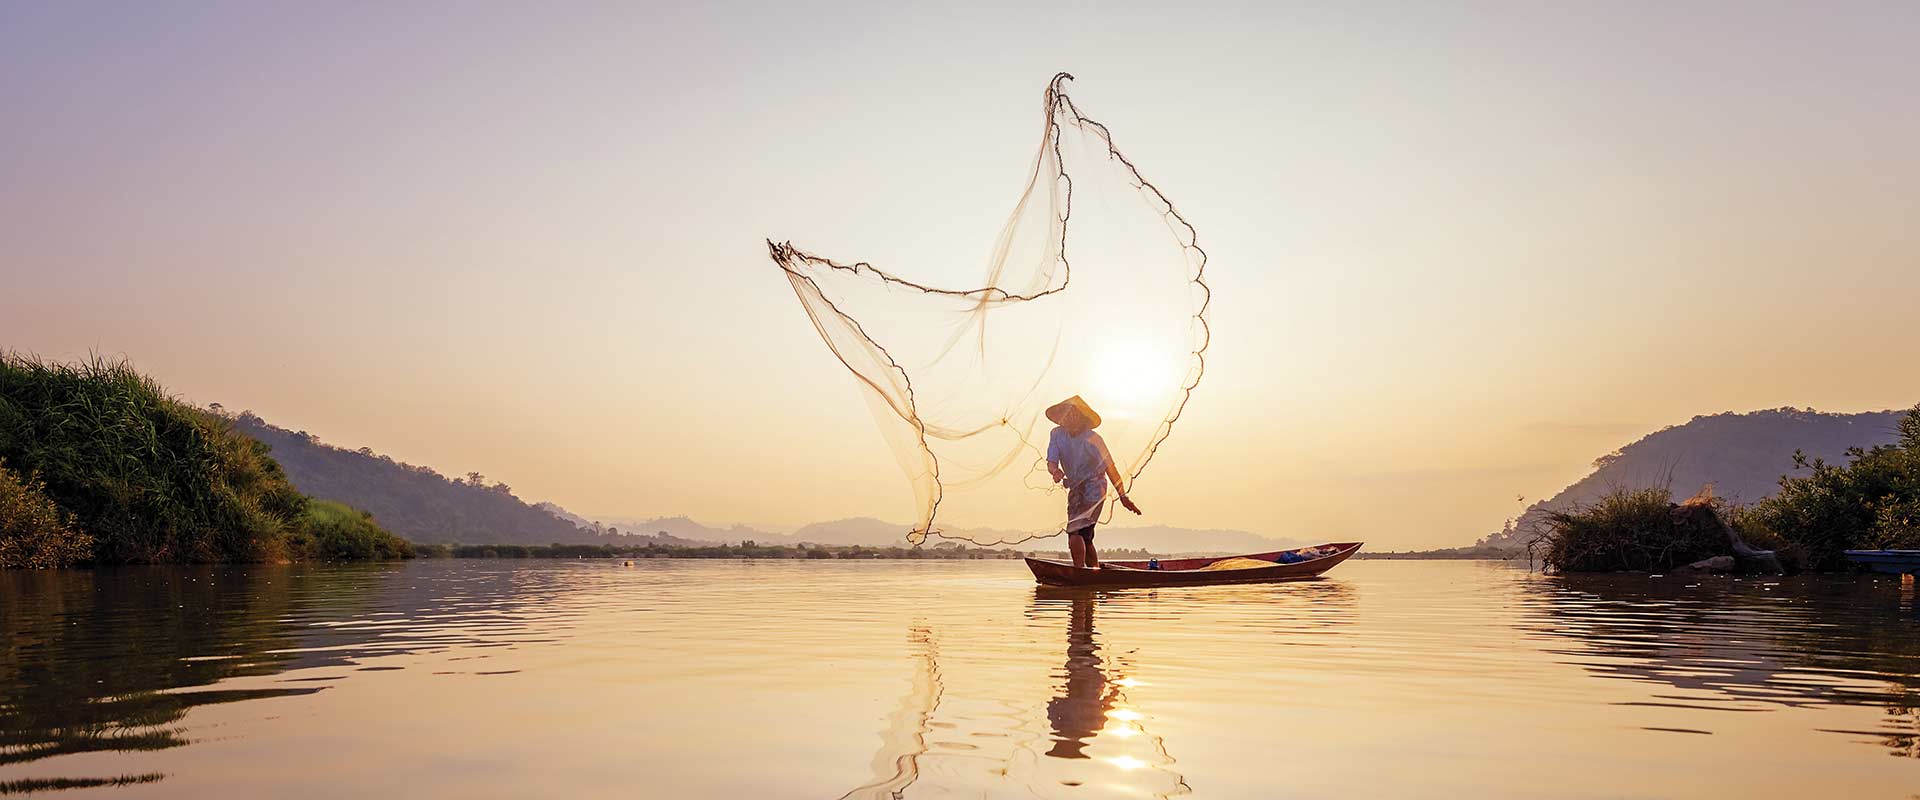 One legged rower on row boat with net flying behind, Cambodia